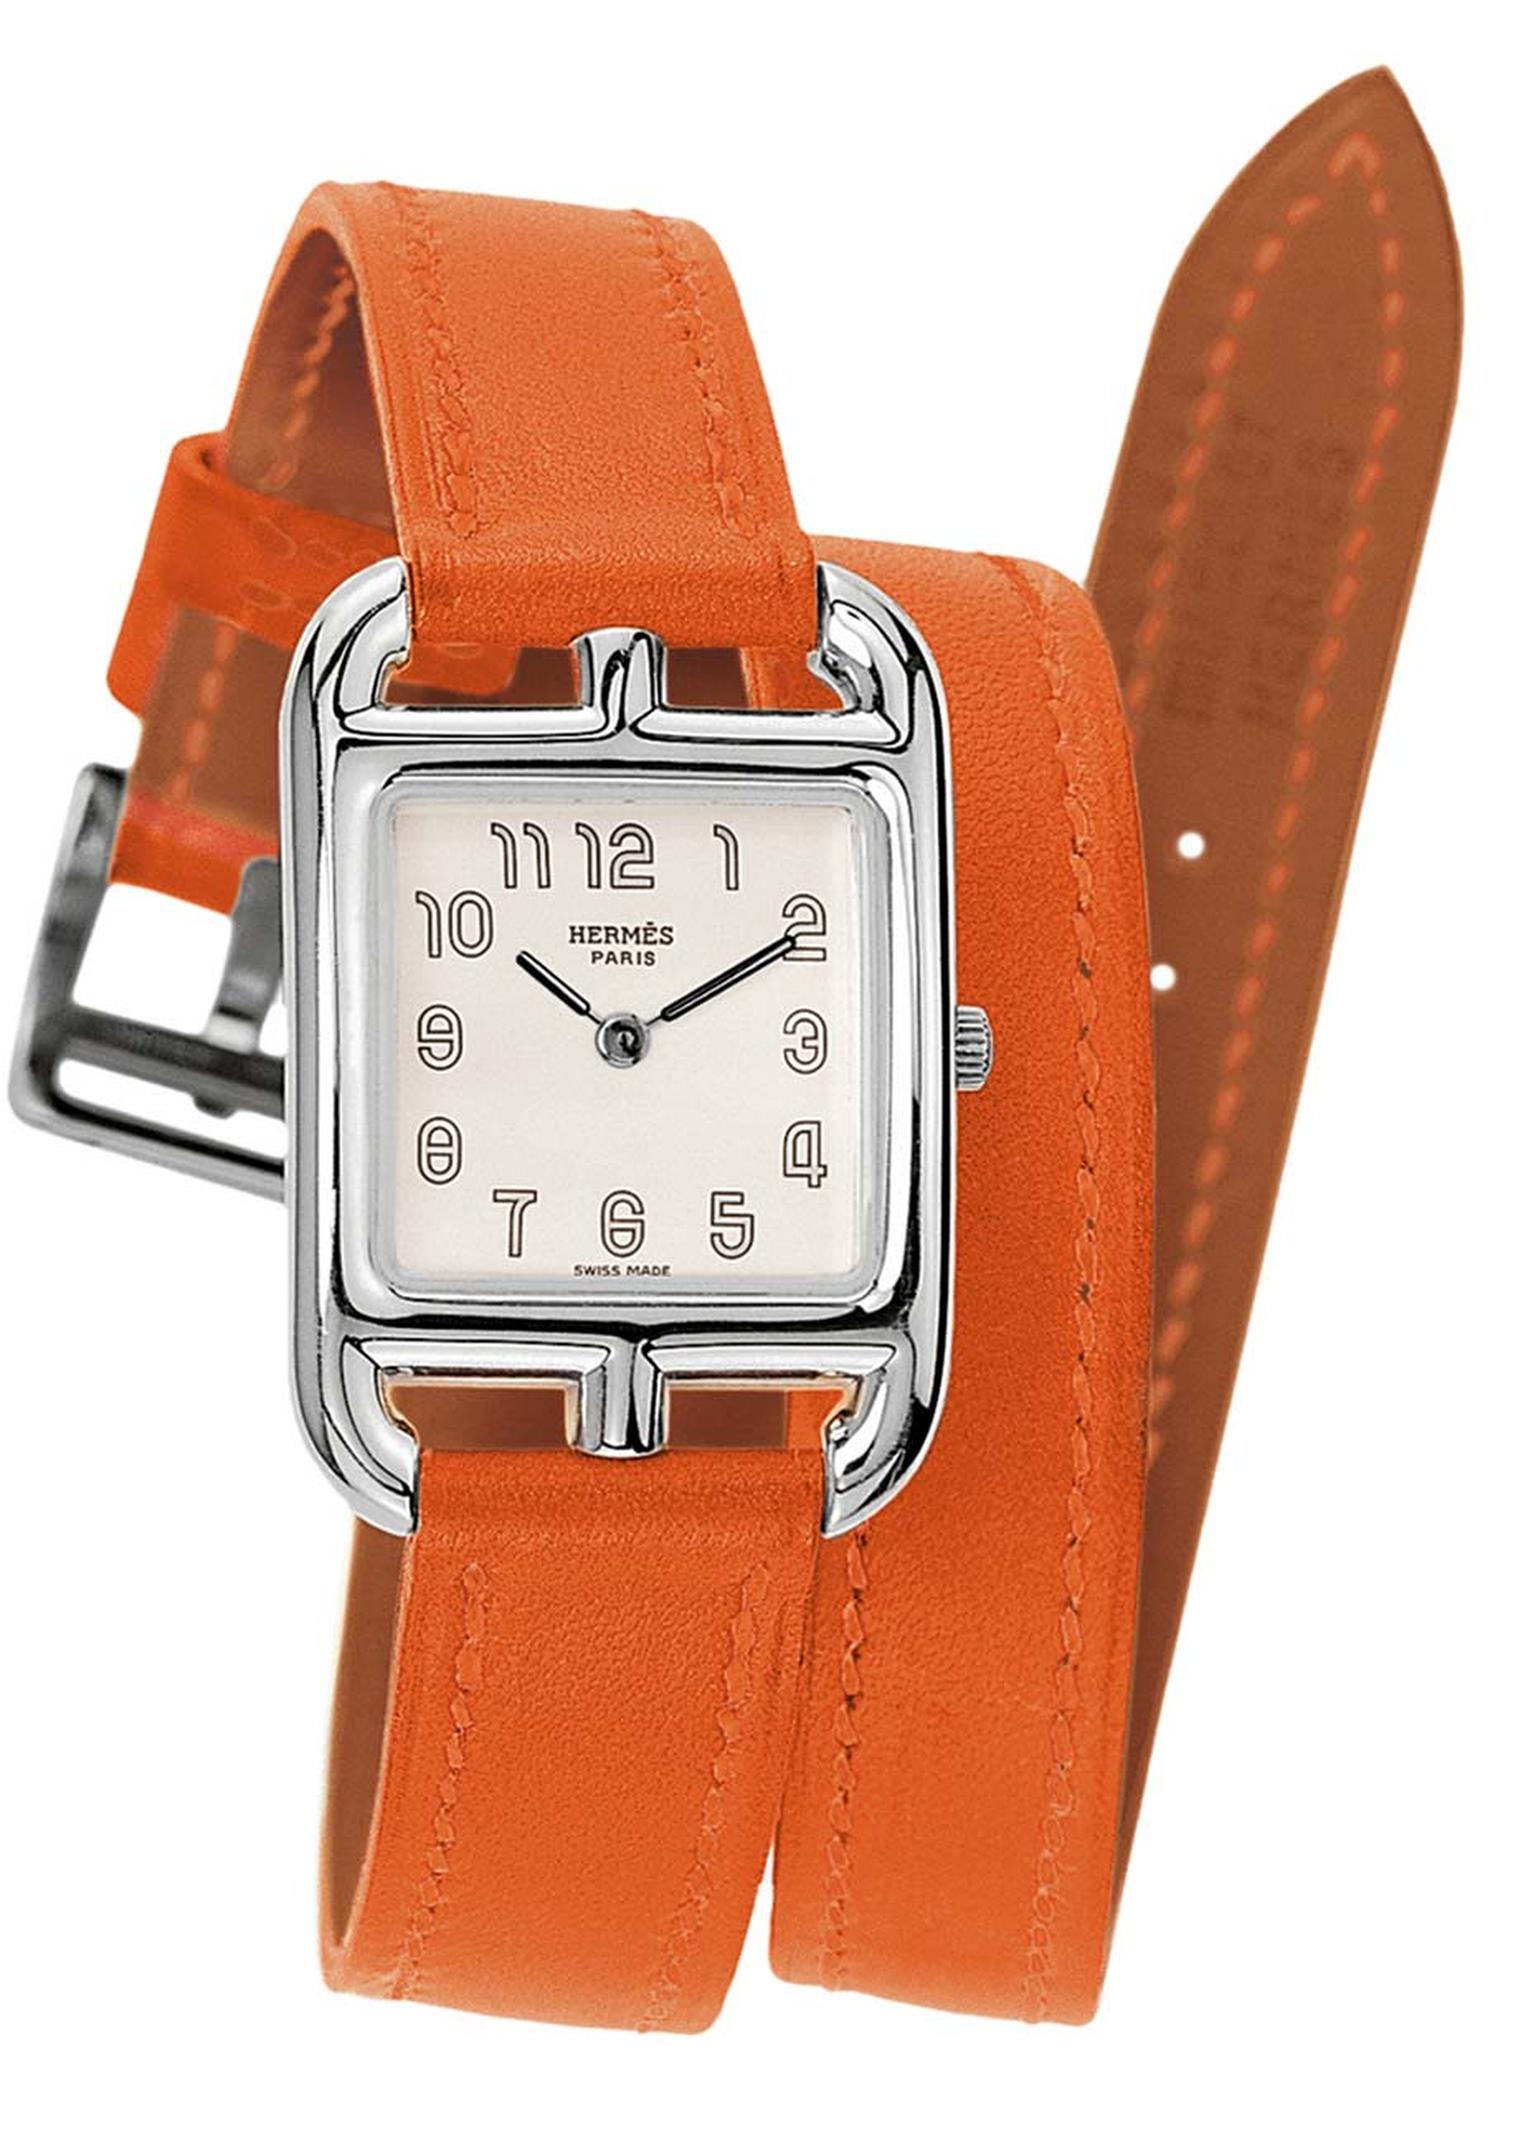 Hermès Cape Cod watch in stainless steel. The classic orange Hermès leather strap is designed to wrap twice around the wrist (£1,800).